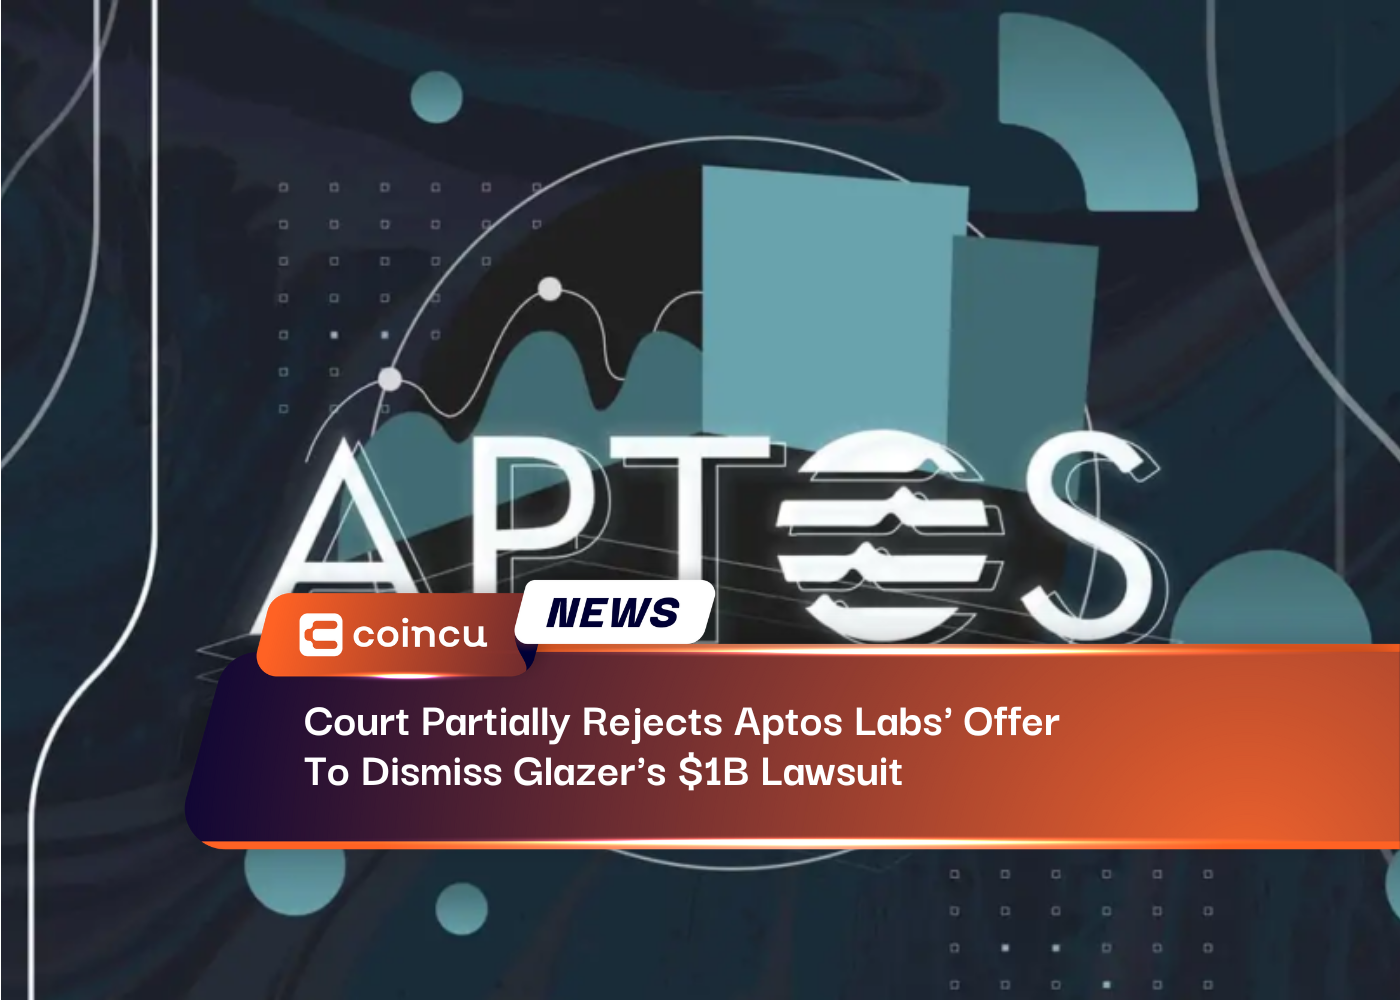 Court Partially Rejects Aptos Labs' Offer To Dismiss Glazer's $1B Lawsuit